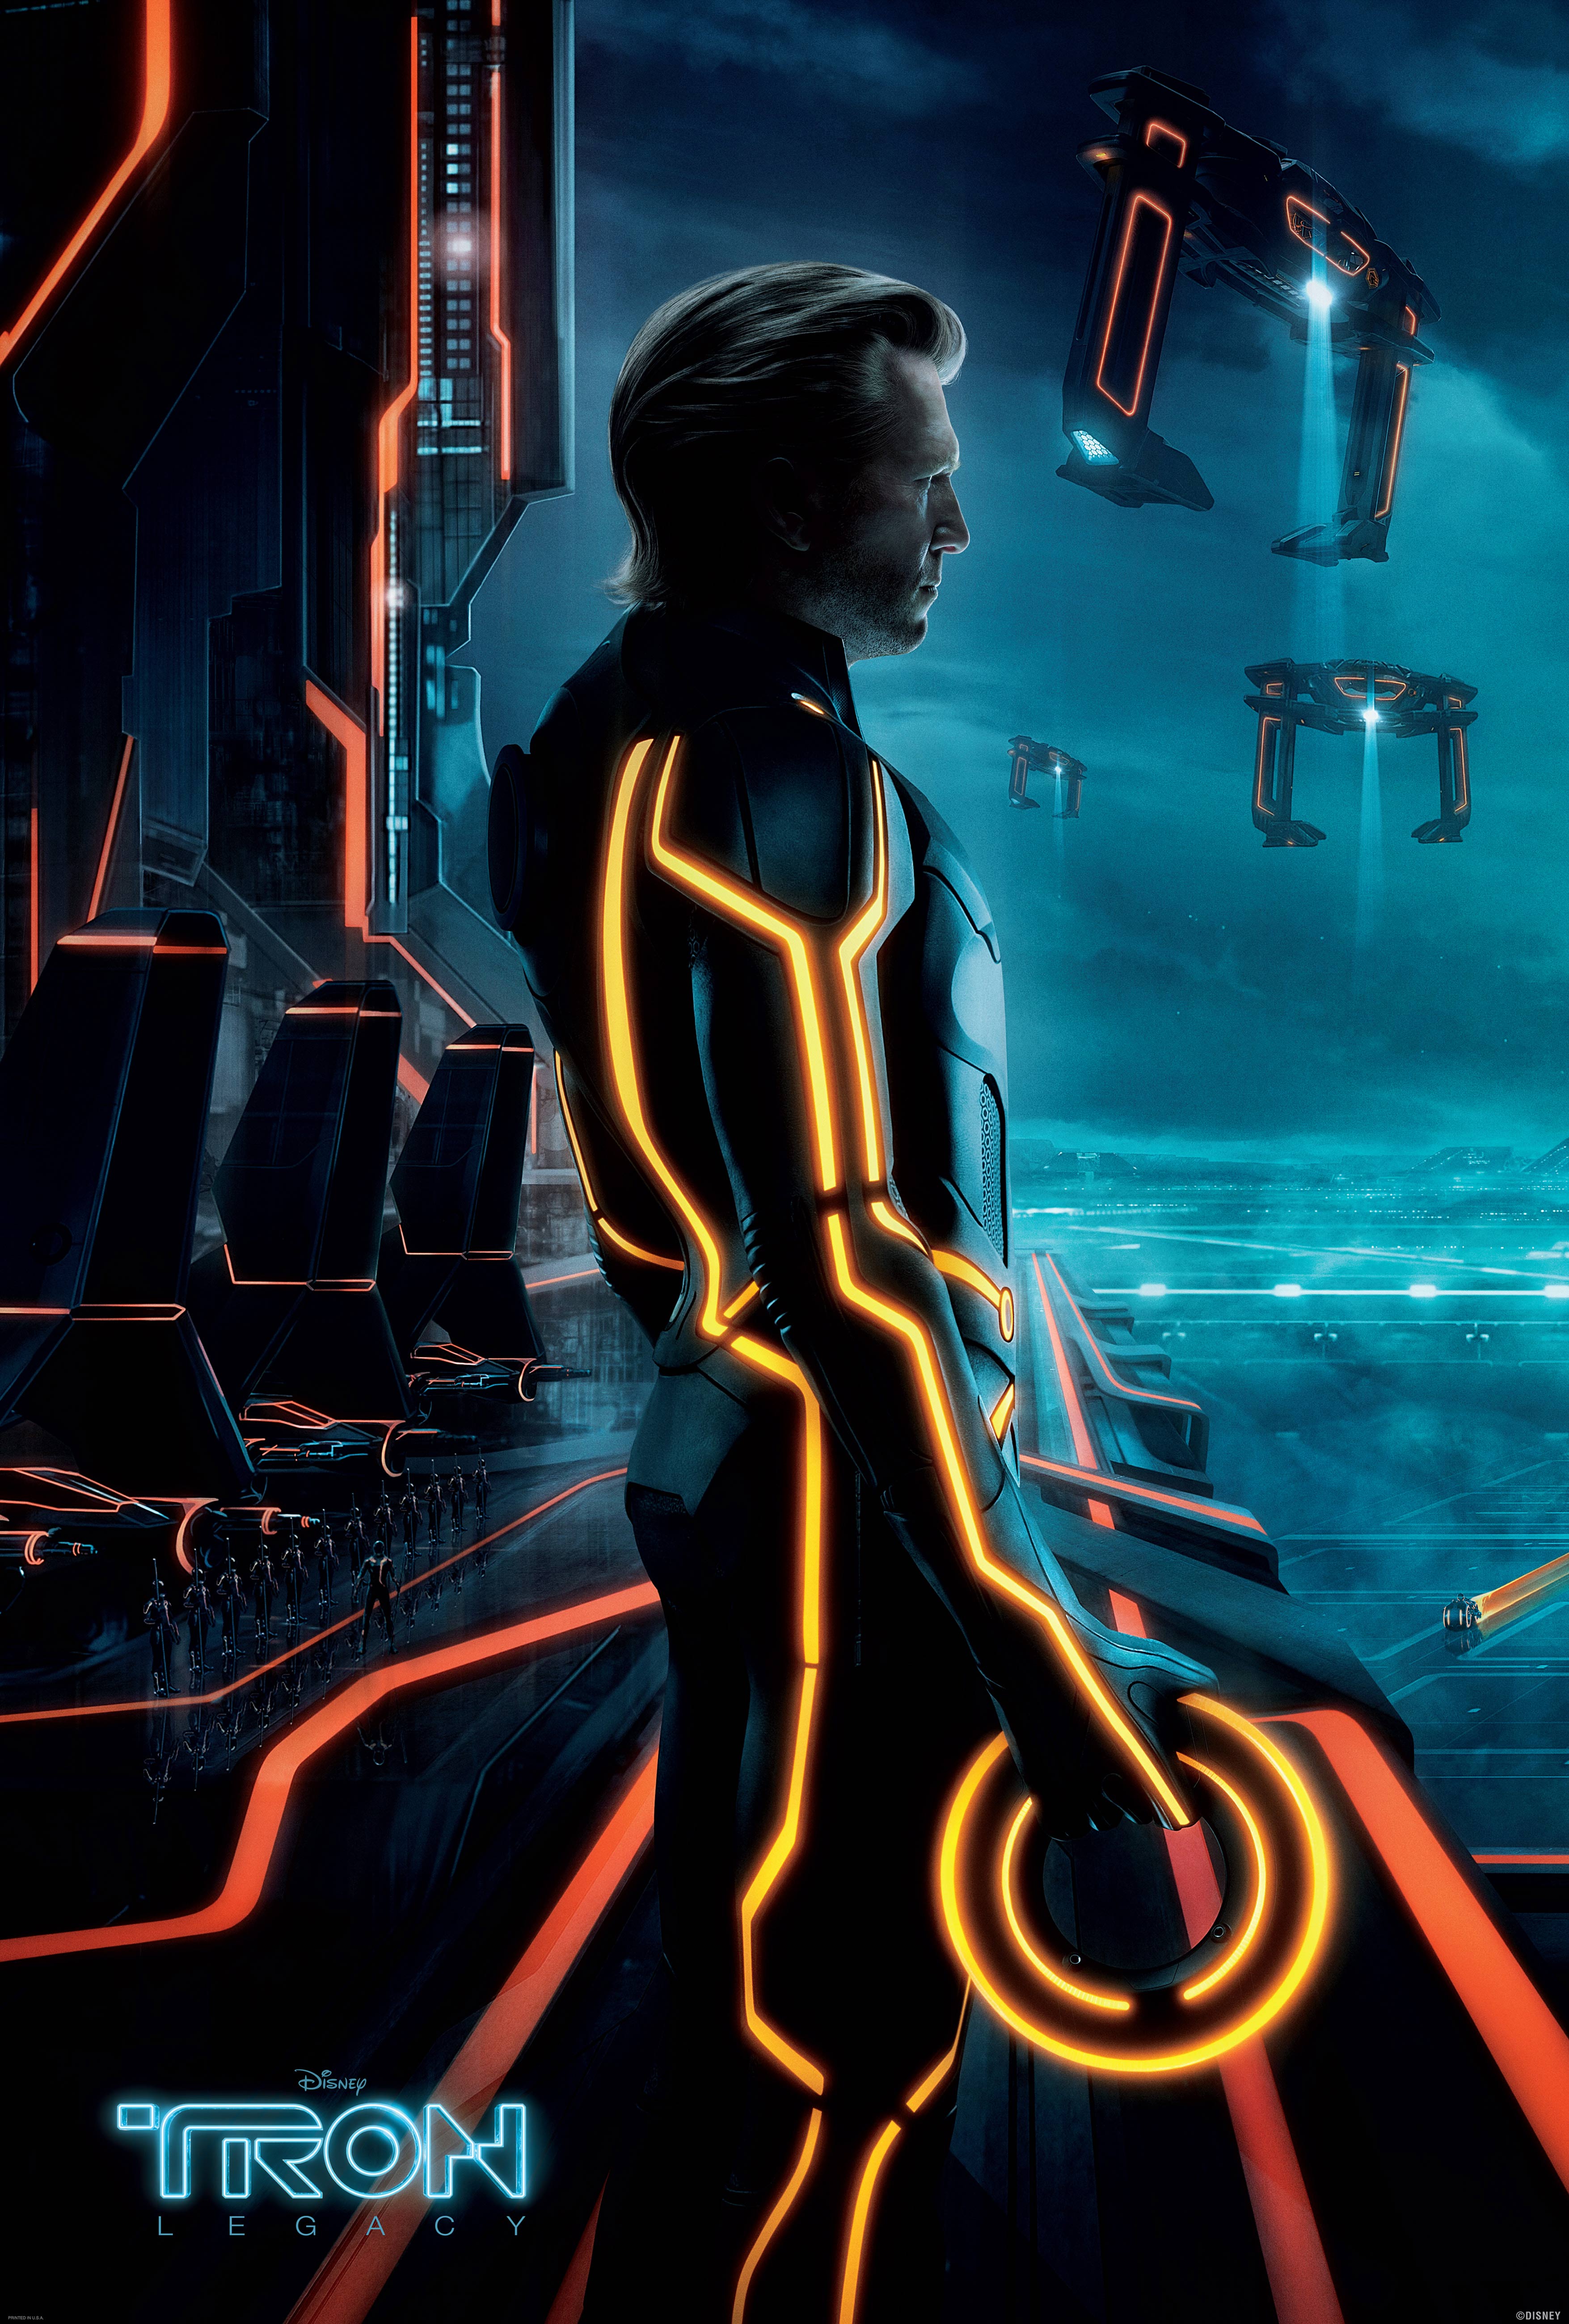 Clu from Tron Legacy Movie wallpaper   Click picture for high